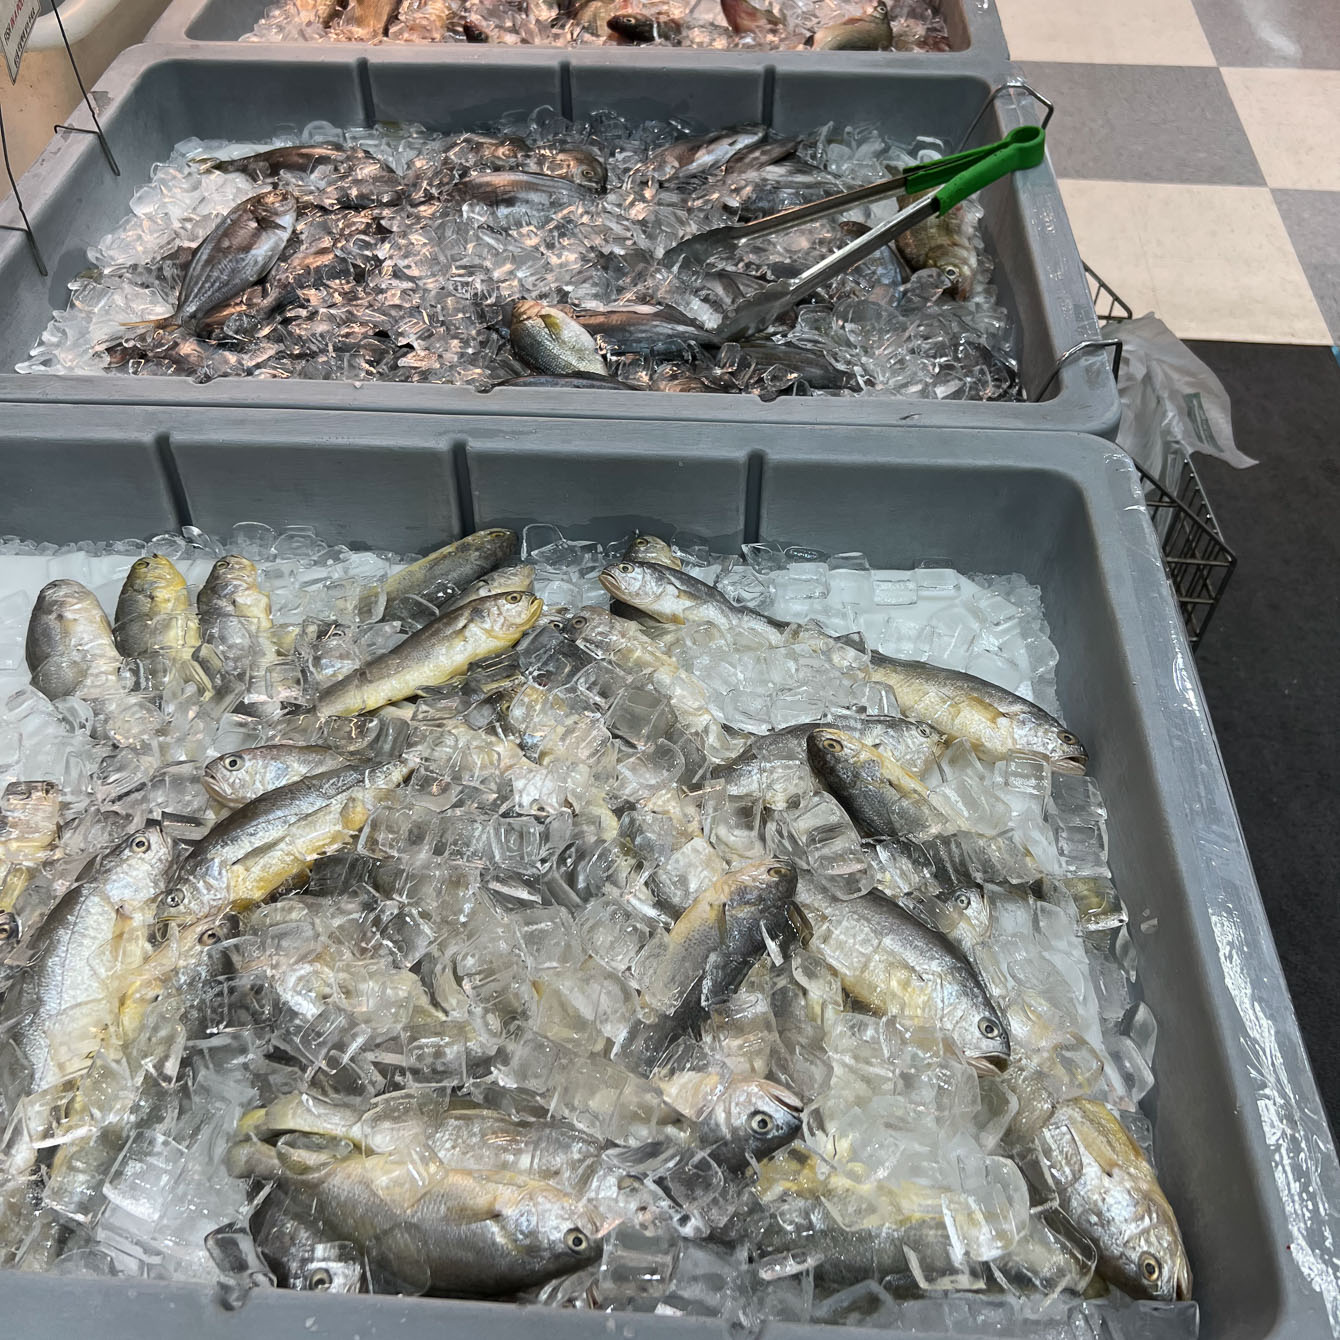 Yellow croaker fishes are in a plastic container with ice